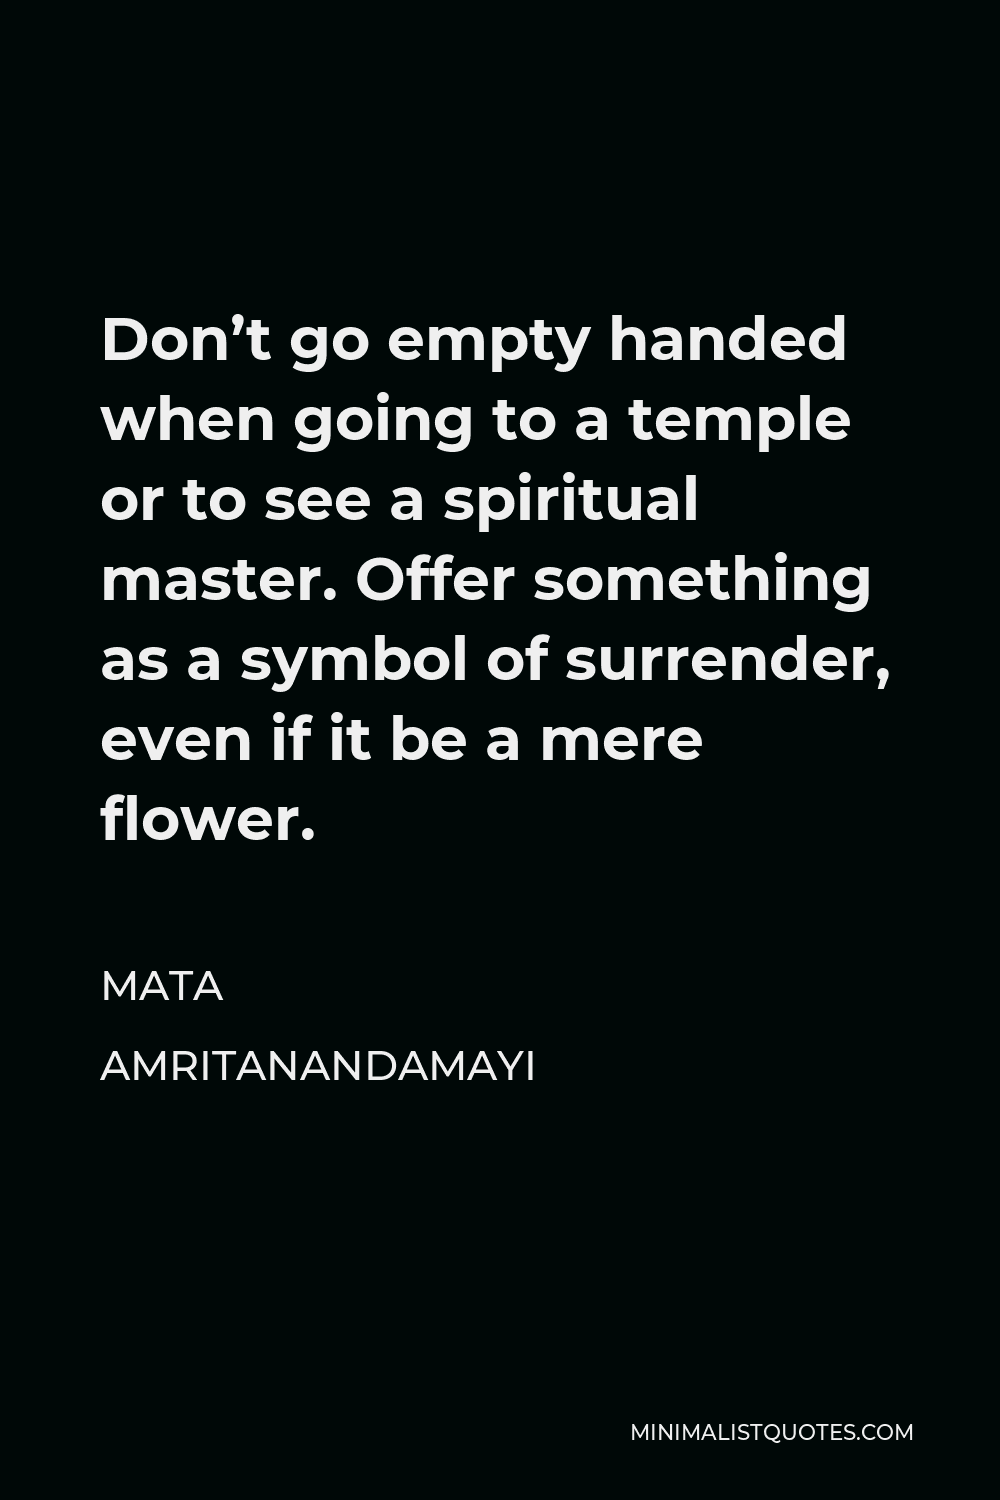 Mata Amritanandamayi Quote - Don’t go empty handed when going to a temple or to see a spiritual master. Offer something as a symbol of surrender, even if it be a mere flower.